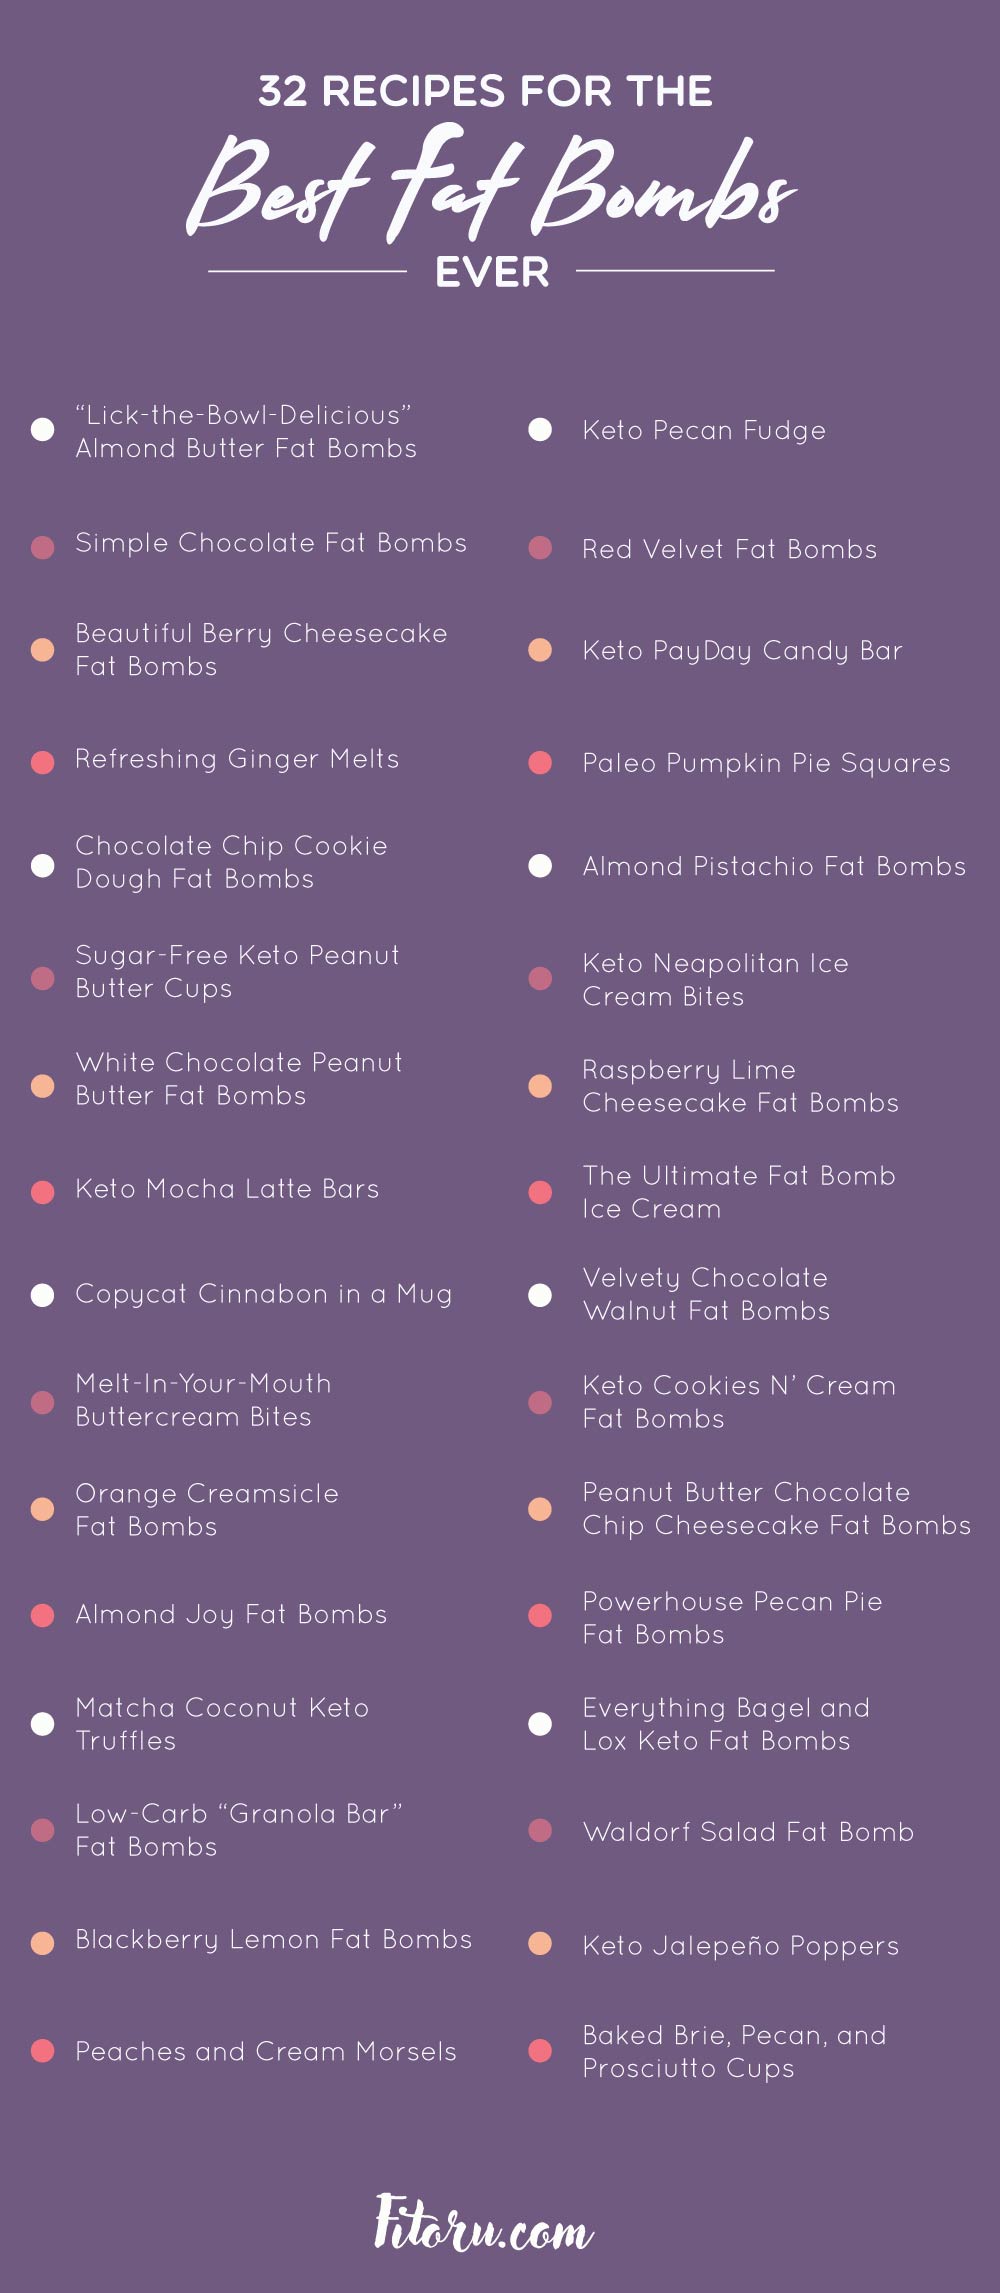 32 Recipes for the Best Fat Bombs Ever